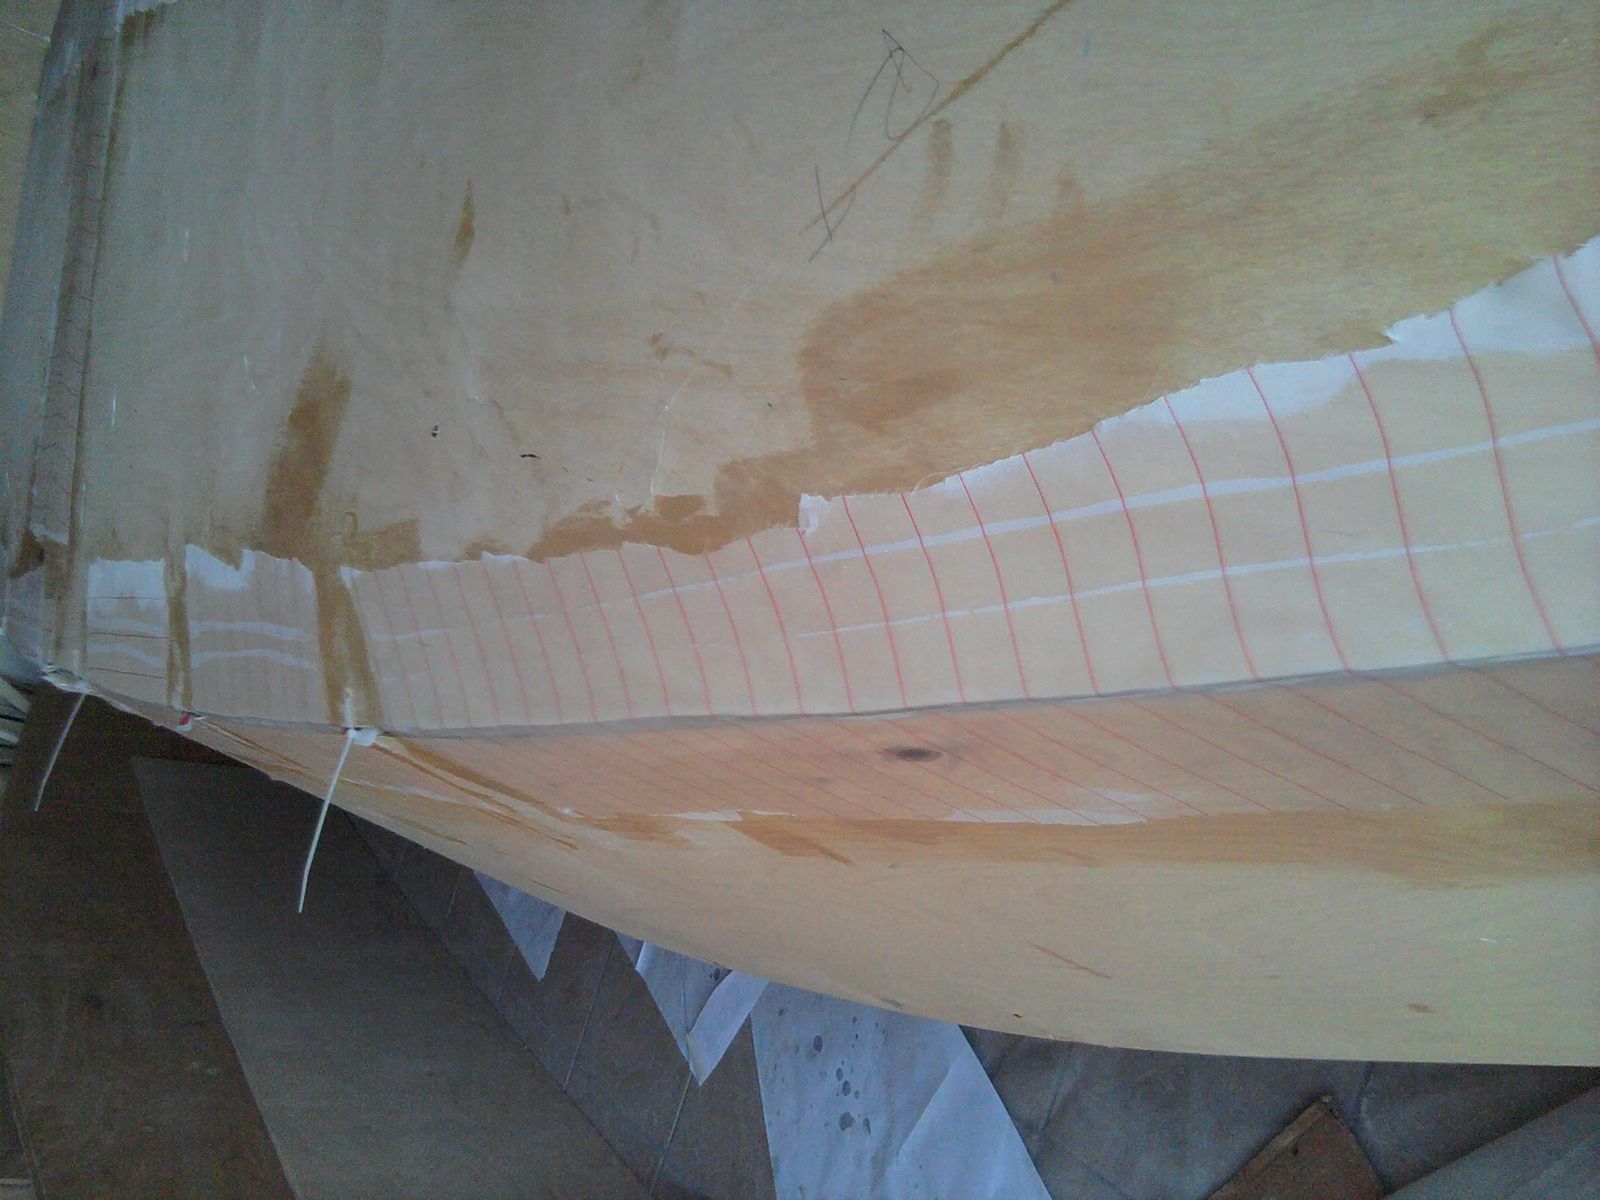 Peel Ply
Having completed all the seams Wet on Wet I cover them with peel ply
The final result was excellent

Builders note.
If you can afford it us the real thing the poor mans peel ply leaves a shiny finish, it may look nice but..and you have to sand it down in order to proceed so same some time and effort and us the real thing

